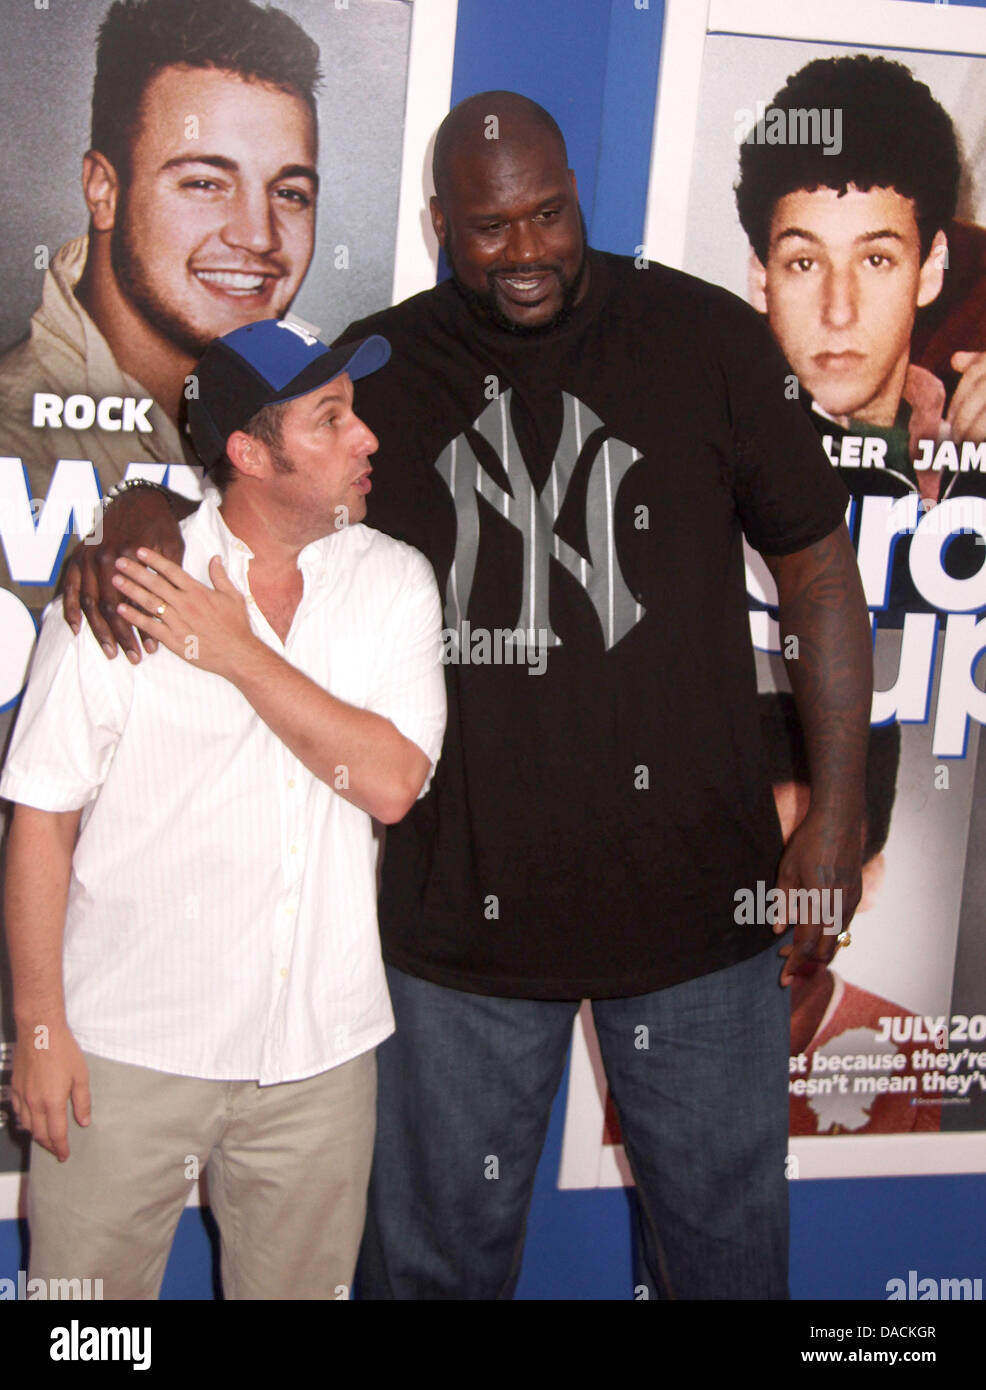 New York, New York, USA. 10th July, 2013. Actor ADAM SANDLER and former basketball player SHAQUILLE O'NEAL attend the New York premiere of 'Grown Ups 2' held at AMC Loews Lincoln Square. Credit:  Nancy Kaszerman/ZUMAPRESS.com/Alamy Live News Stock Photo